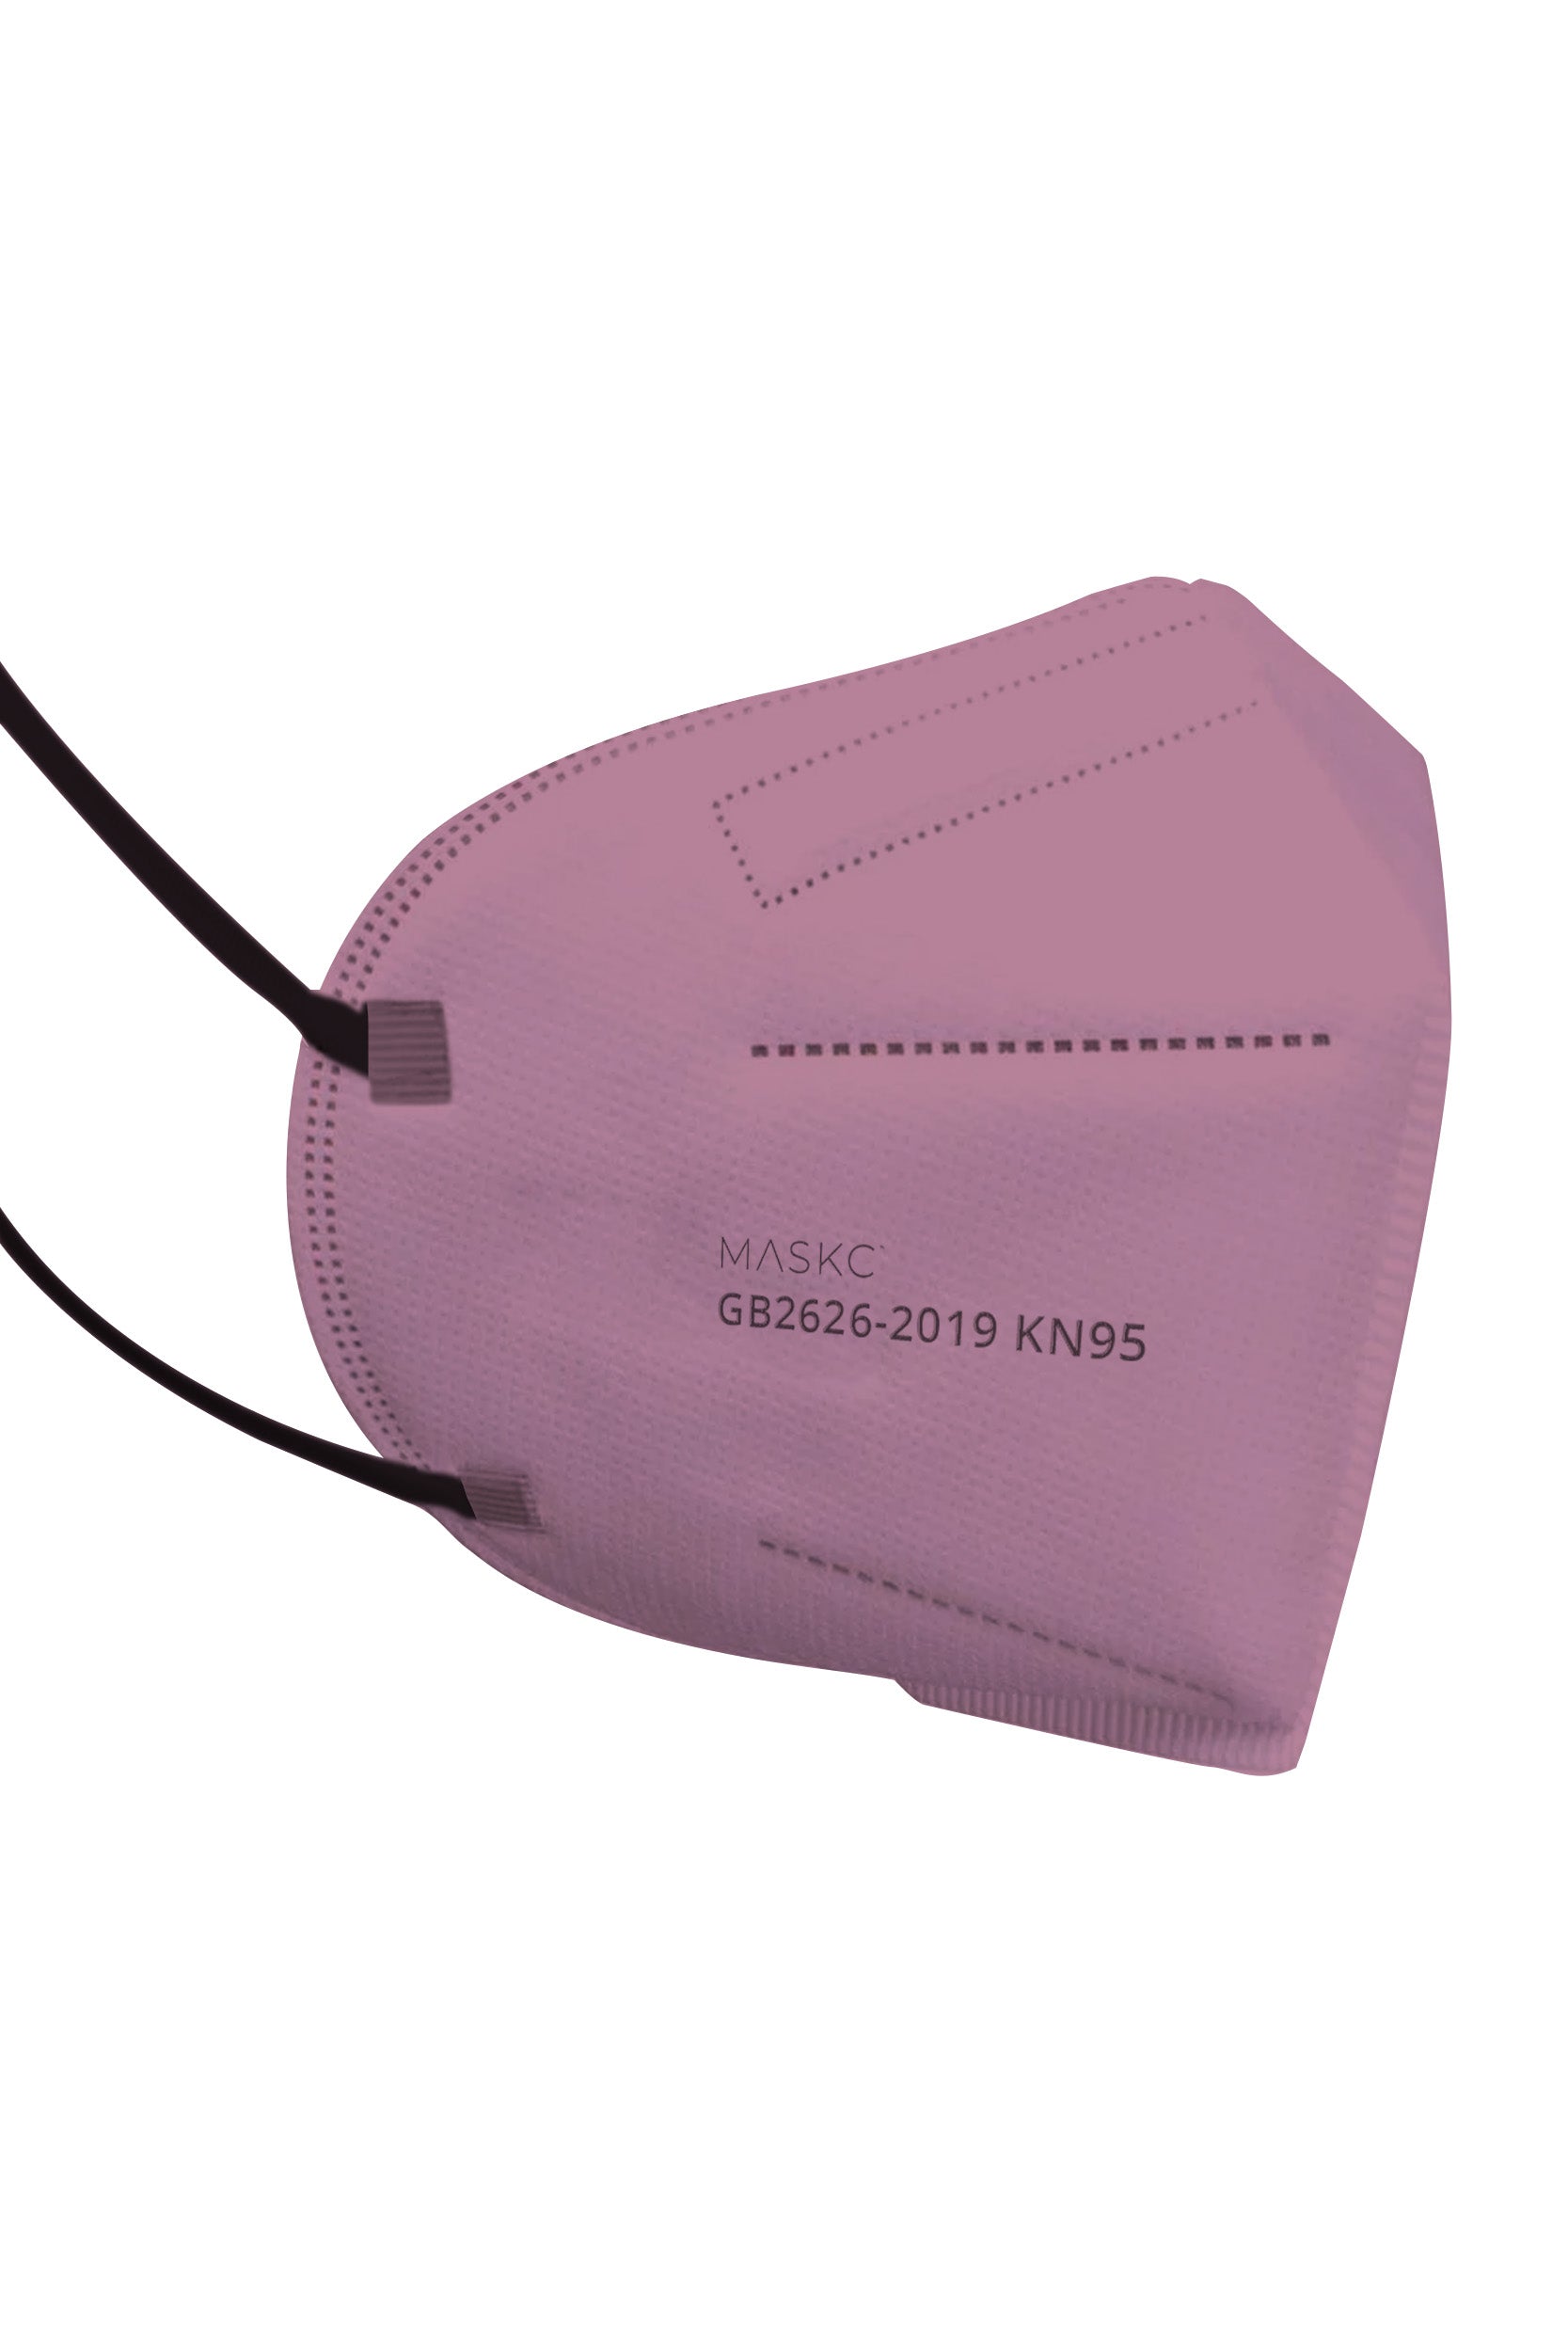 Stylish pink KN95 face mask, with soft black ear loops and high quality fabric. 